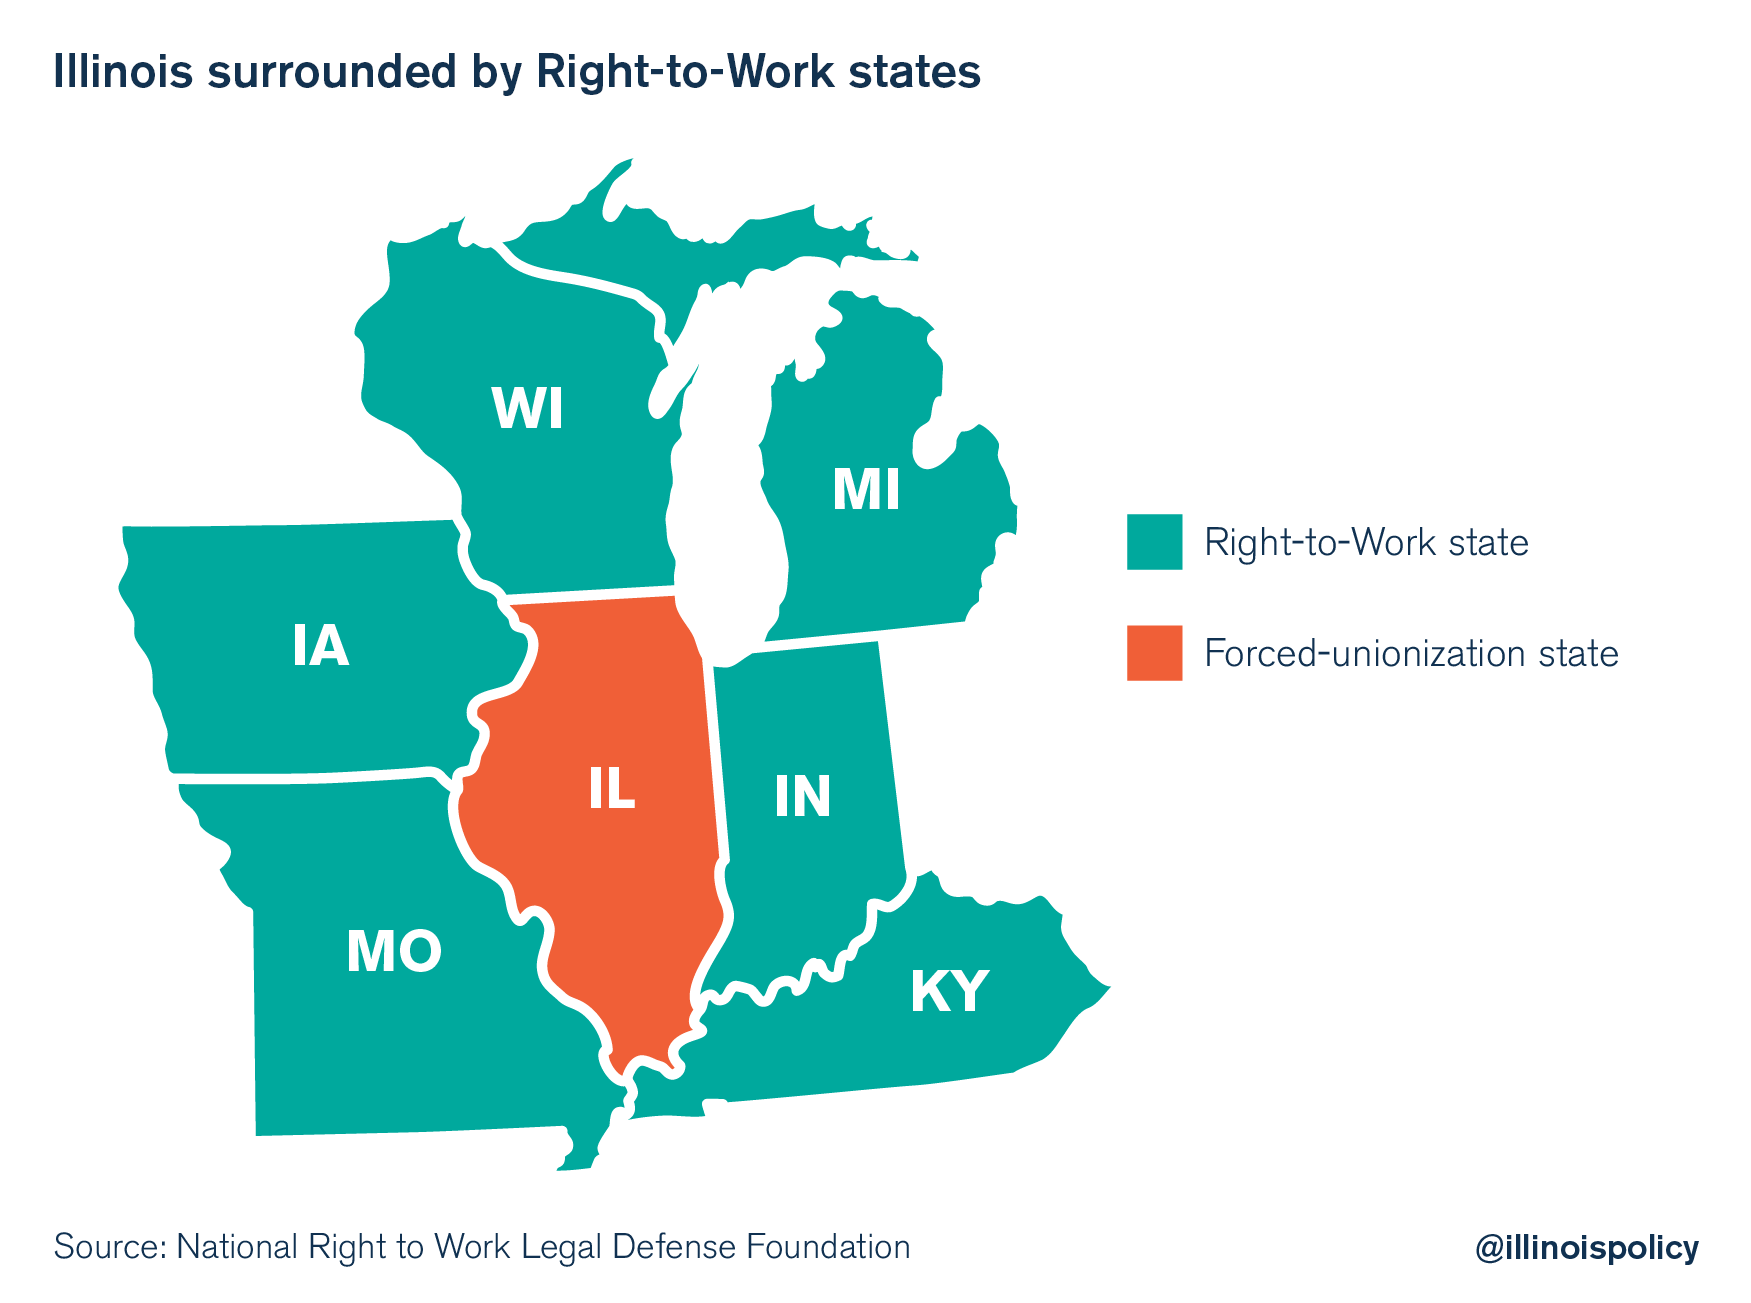 Right-to-Work states